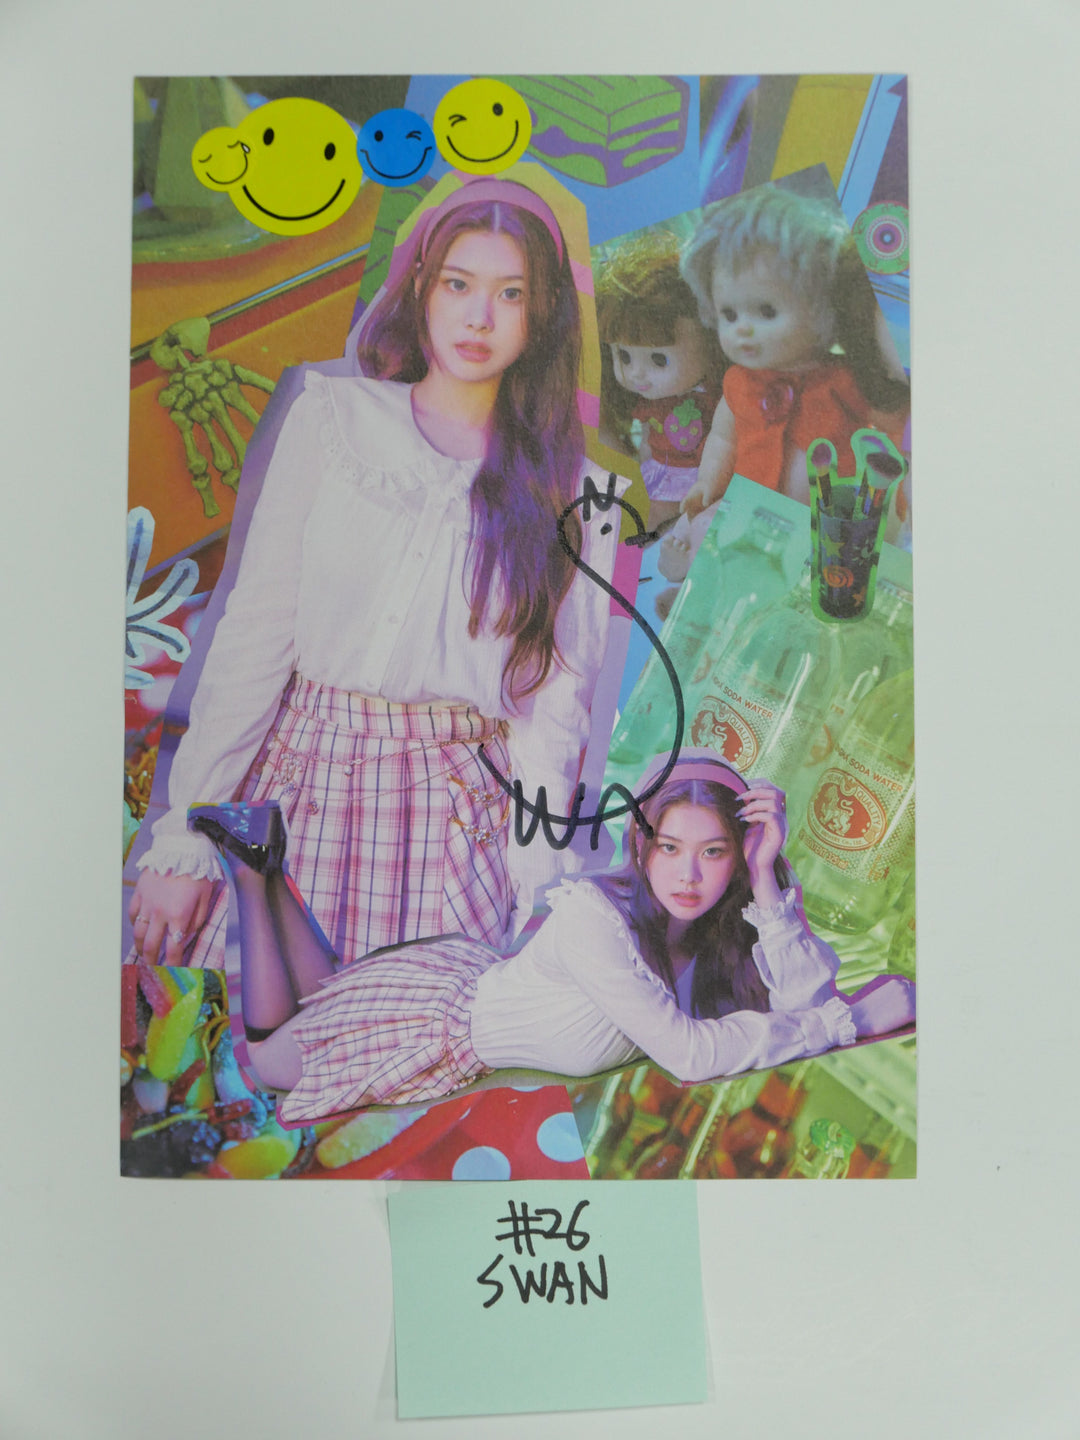 Purple Kiss 'HIDE & SEEK', 'INTO VIOLET' - A Cut Page From Fansign Event Albums